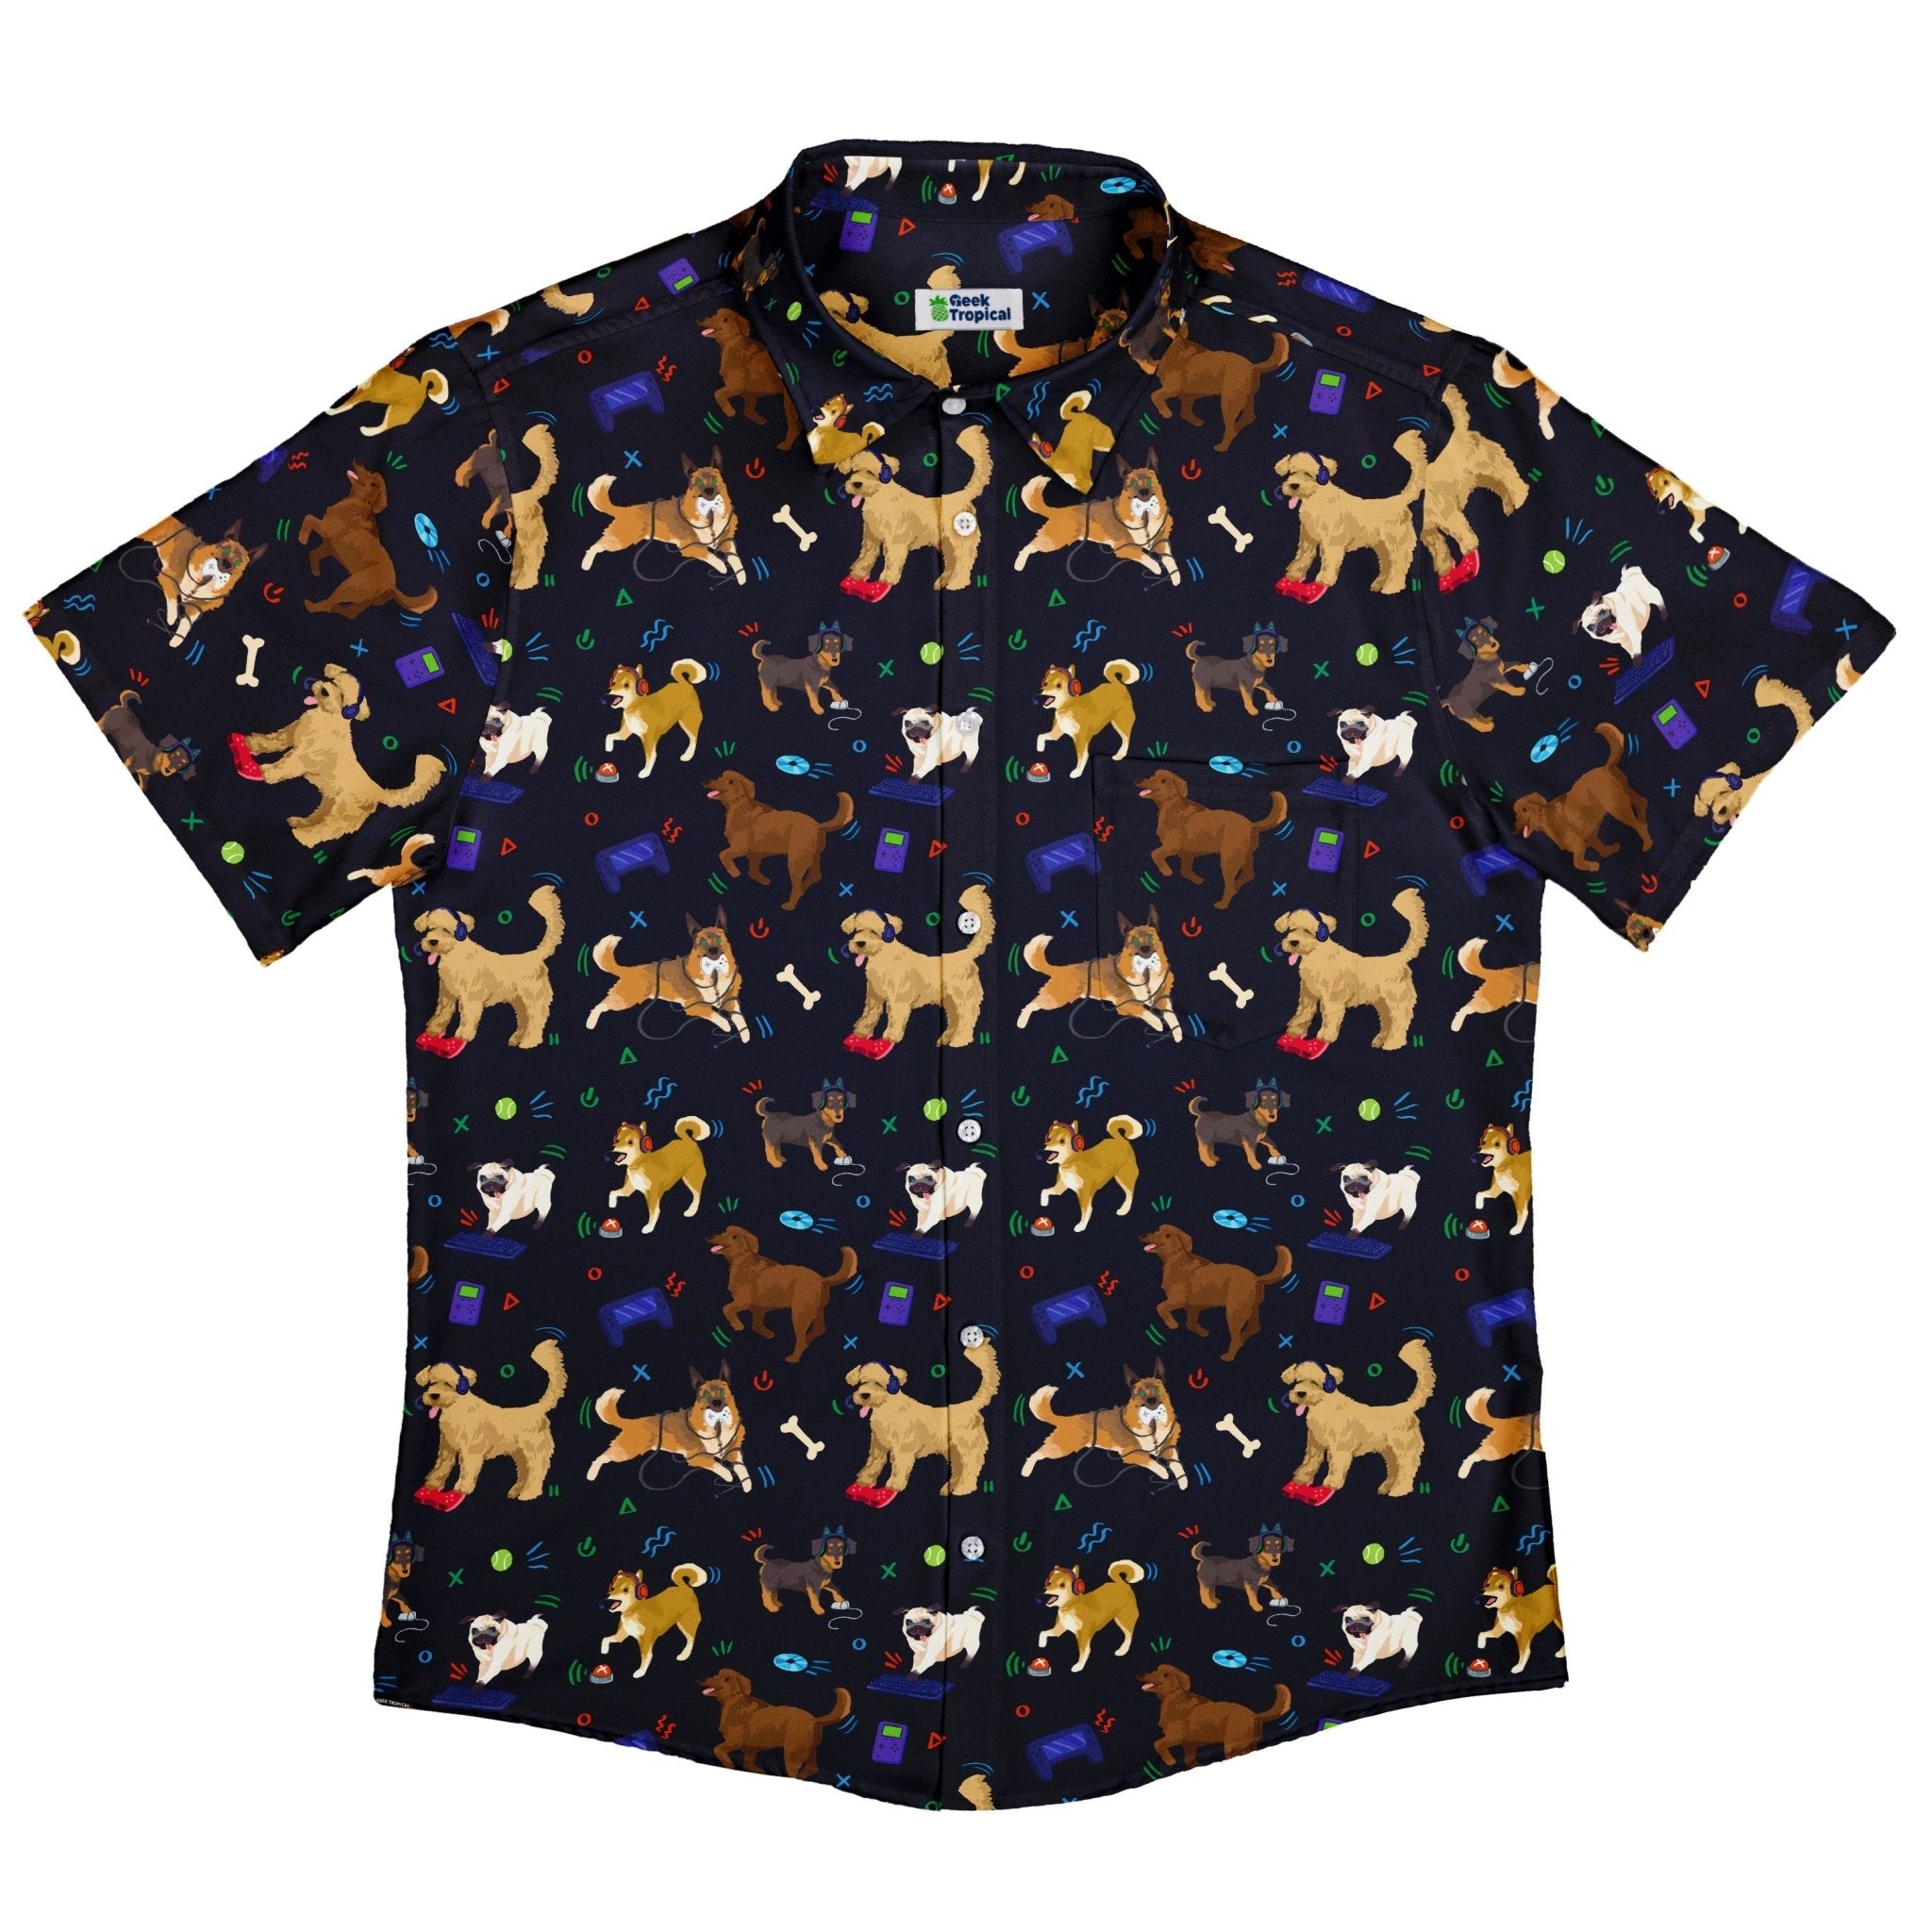 Video Game Dogs Dark Button Up Shirt - adult sizing - Animal Patterns - Design by Claire Murphy